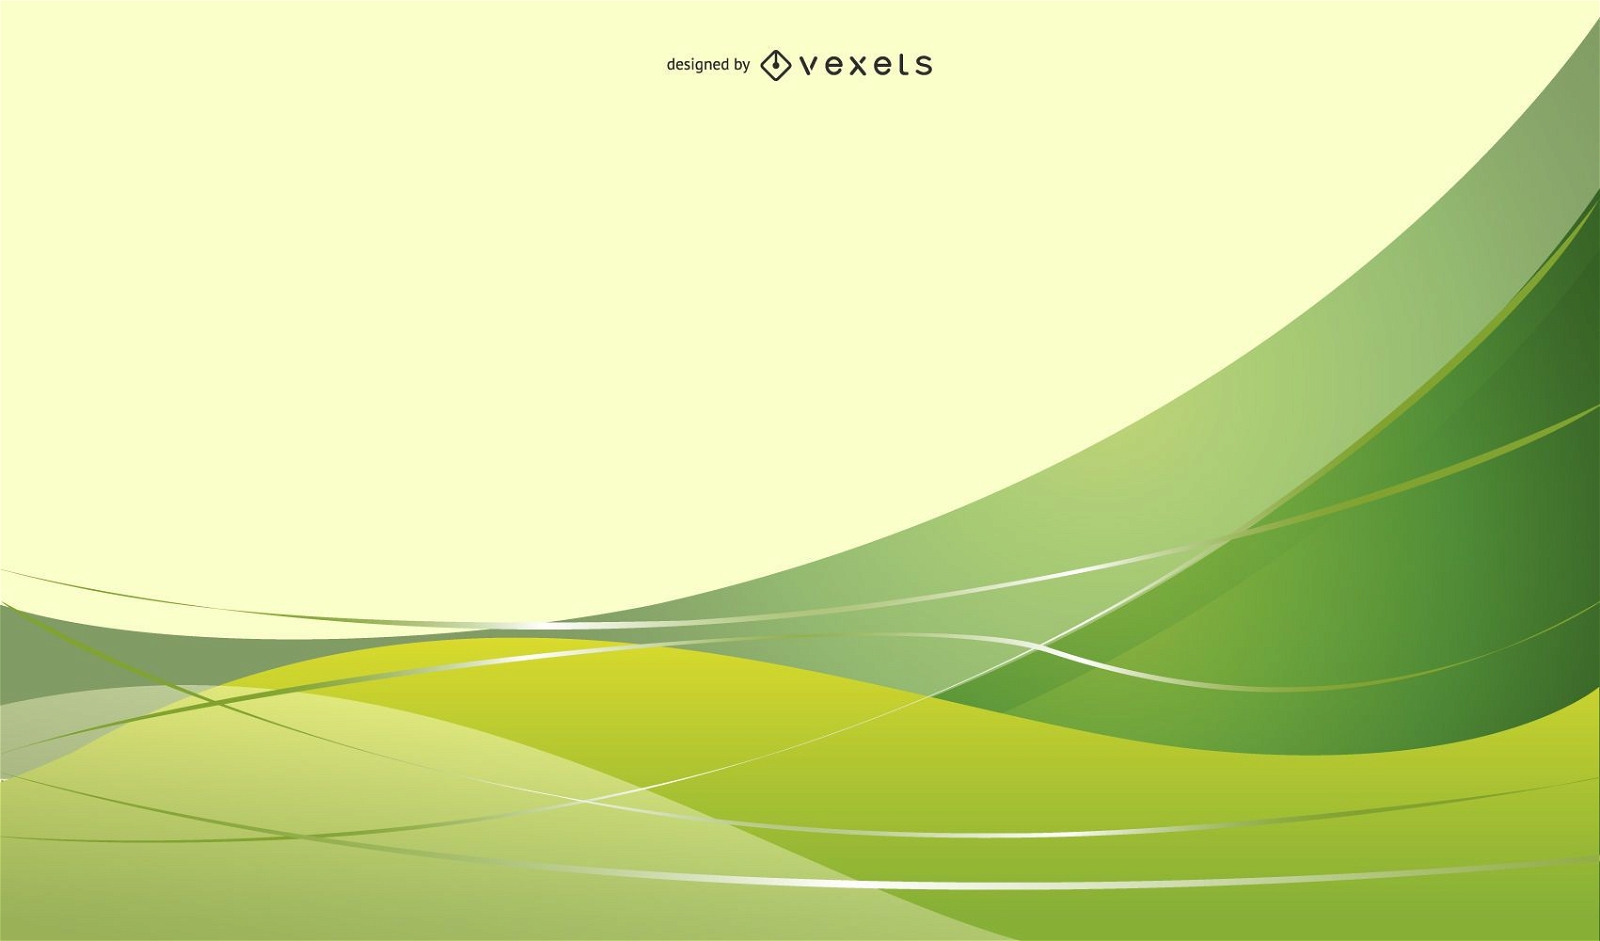 Green background Vector & Graphics to Download